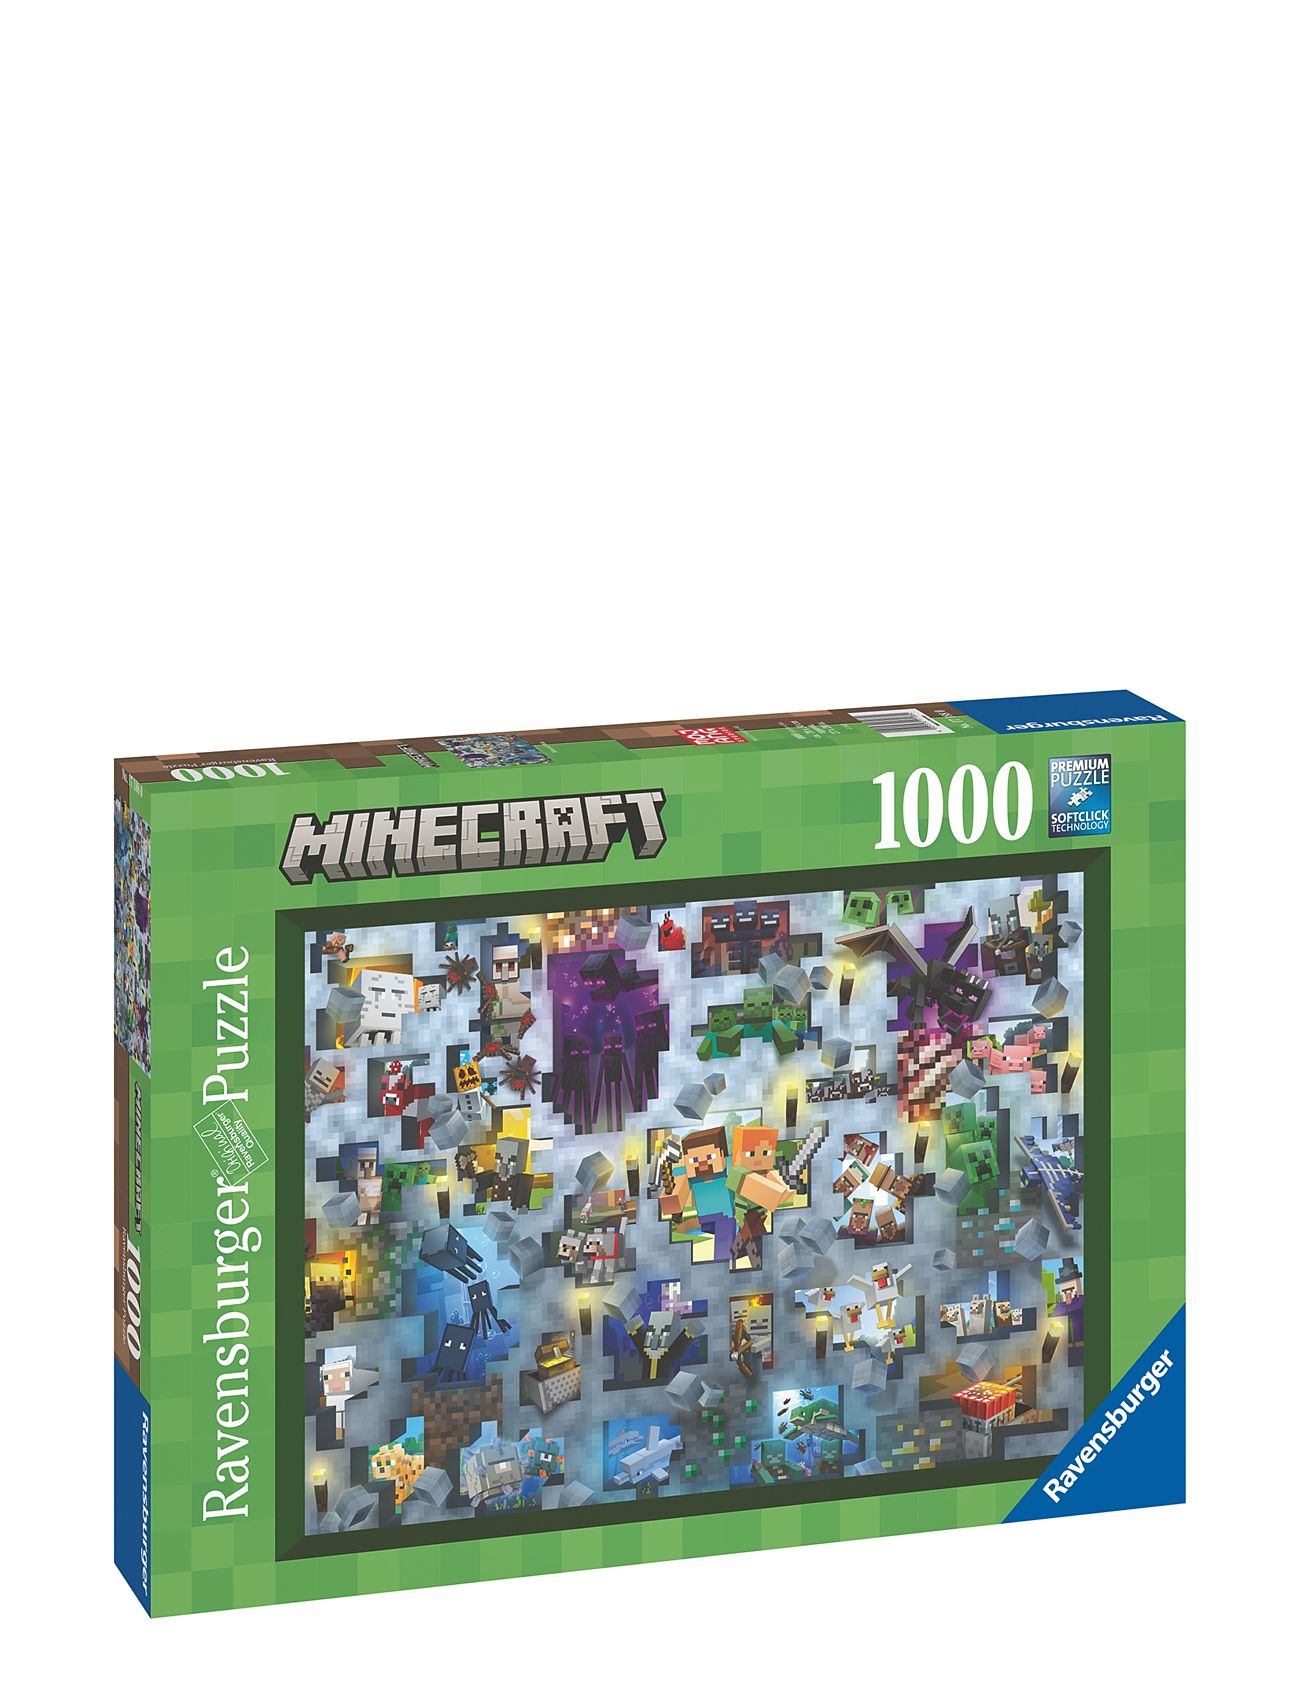 Minecraft Mobs 1000P Toys Puzzles And Games Puzzles Classic Puzzles Multi/patterned Ravensburger